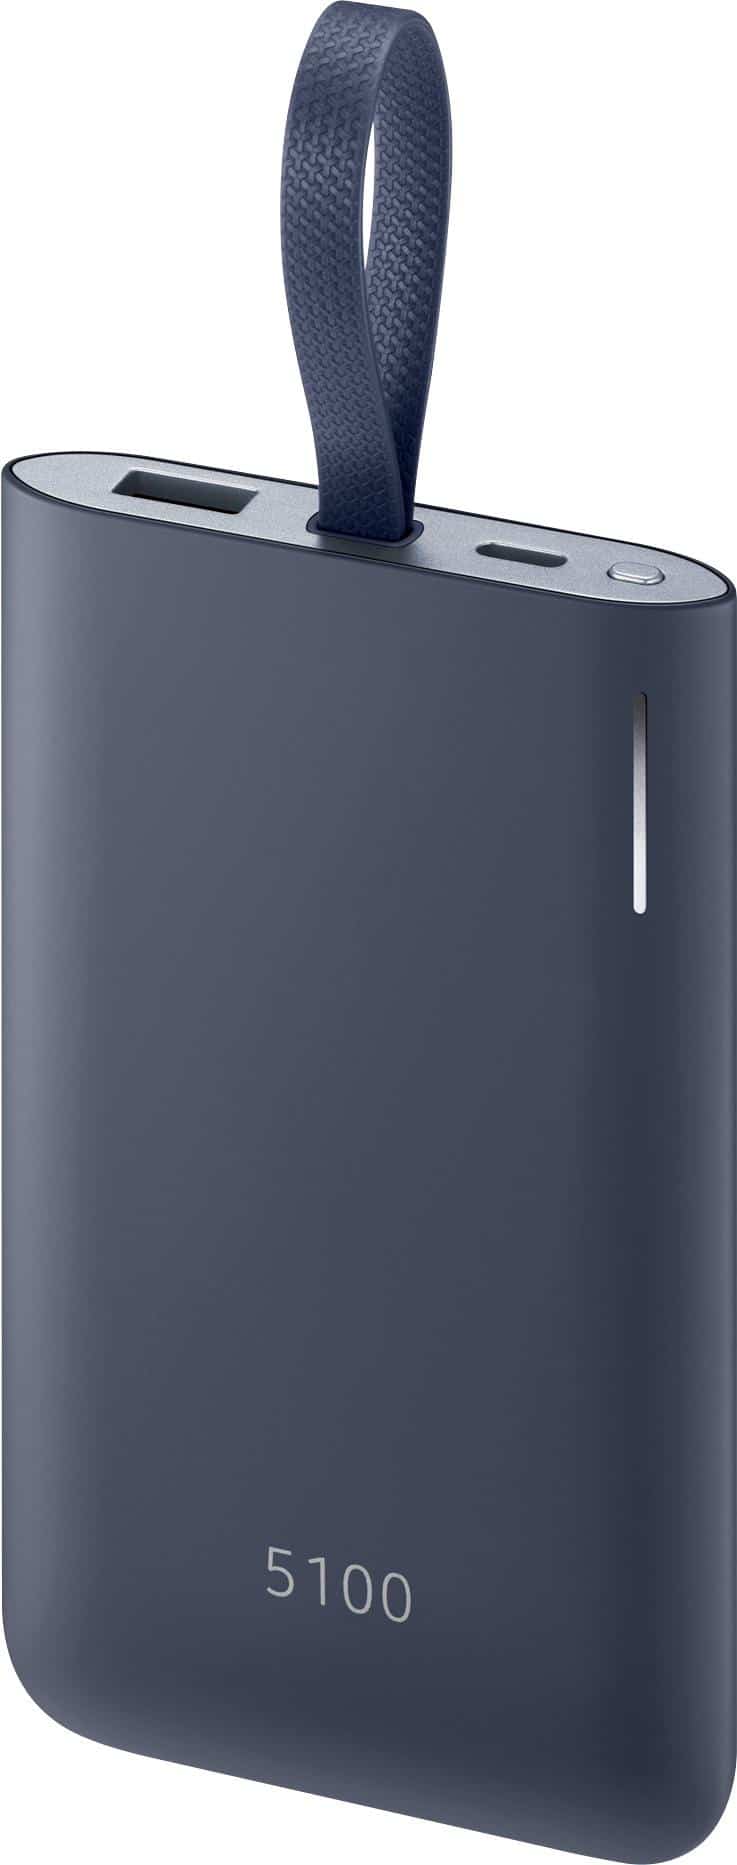 Samsung Fast Chargers at Best Buy